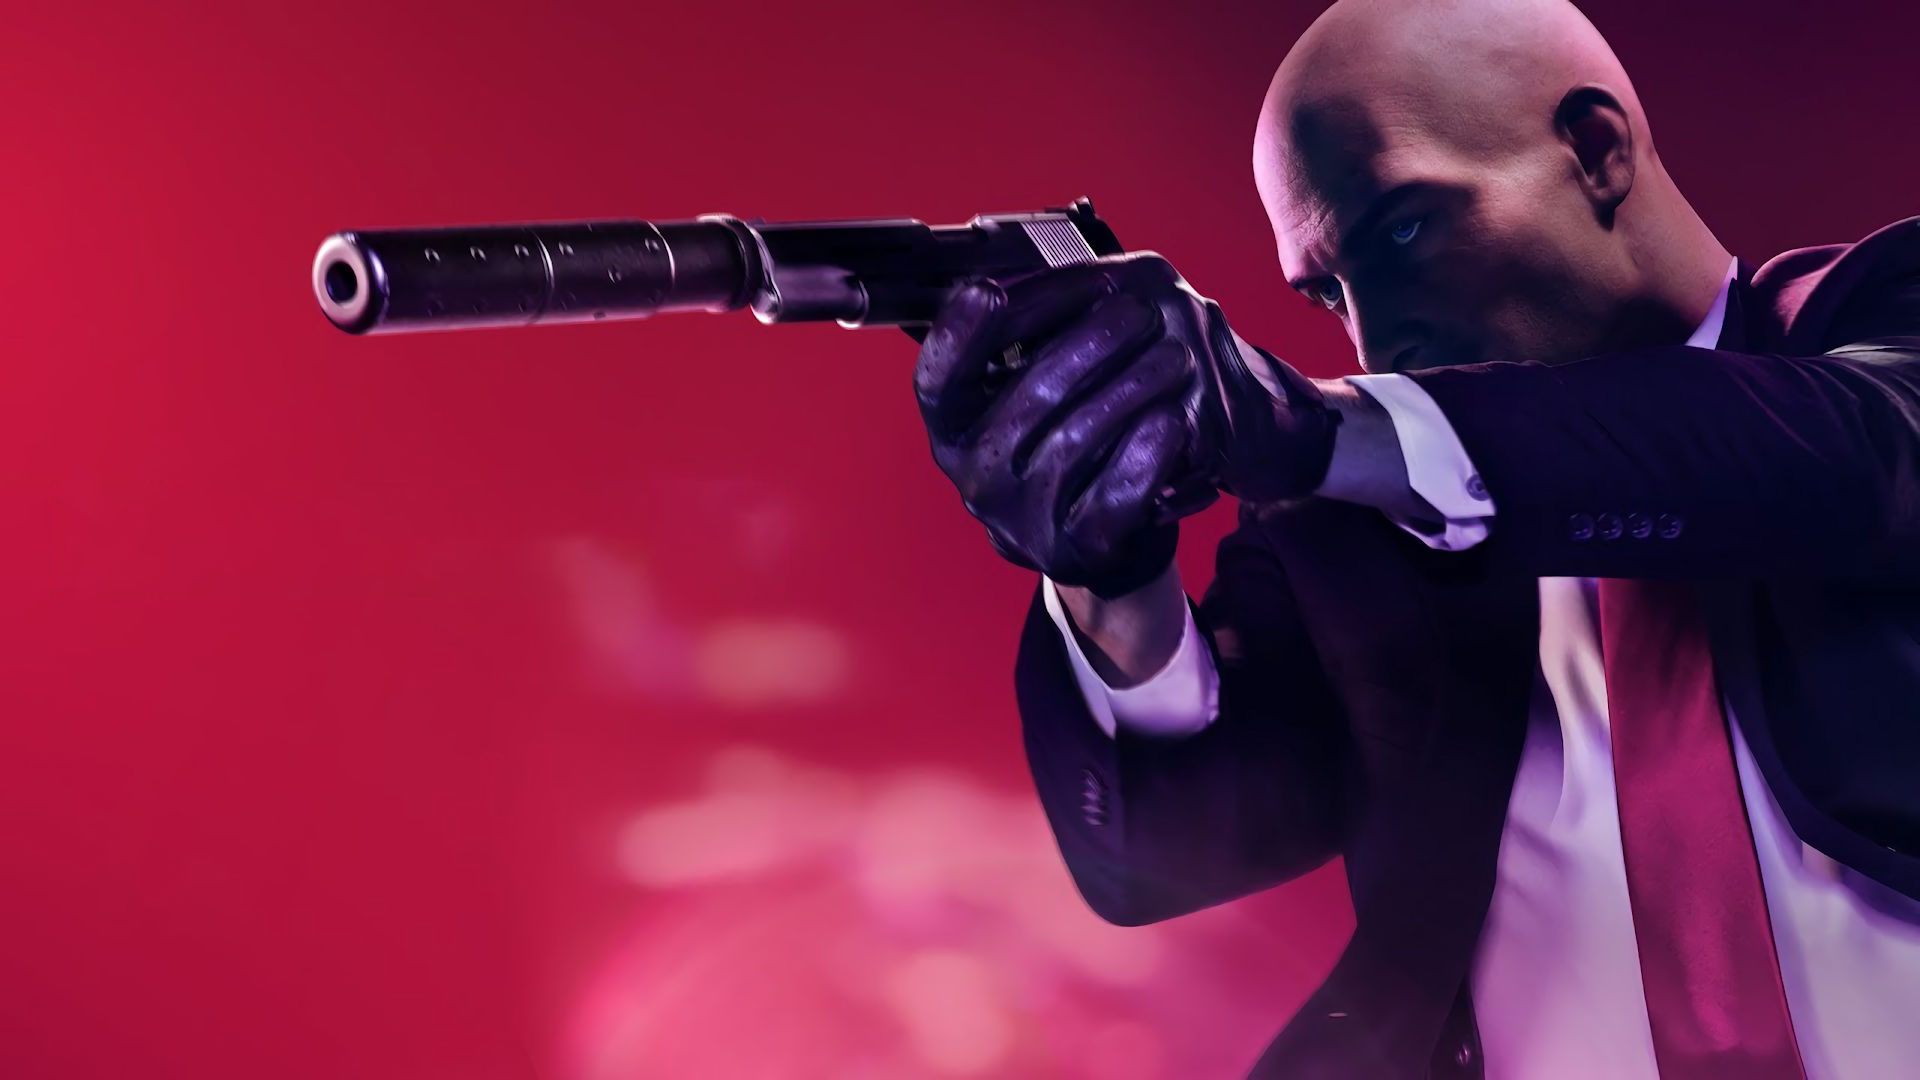 NVIDIA Rolls Out HITMAN 3 Game Ready Update - Download GeForce 512.95